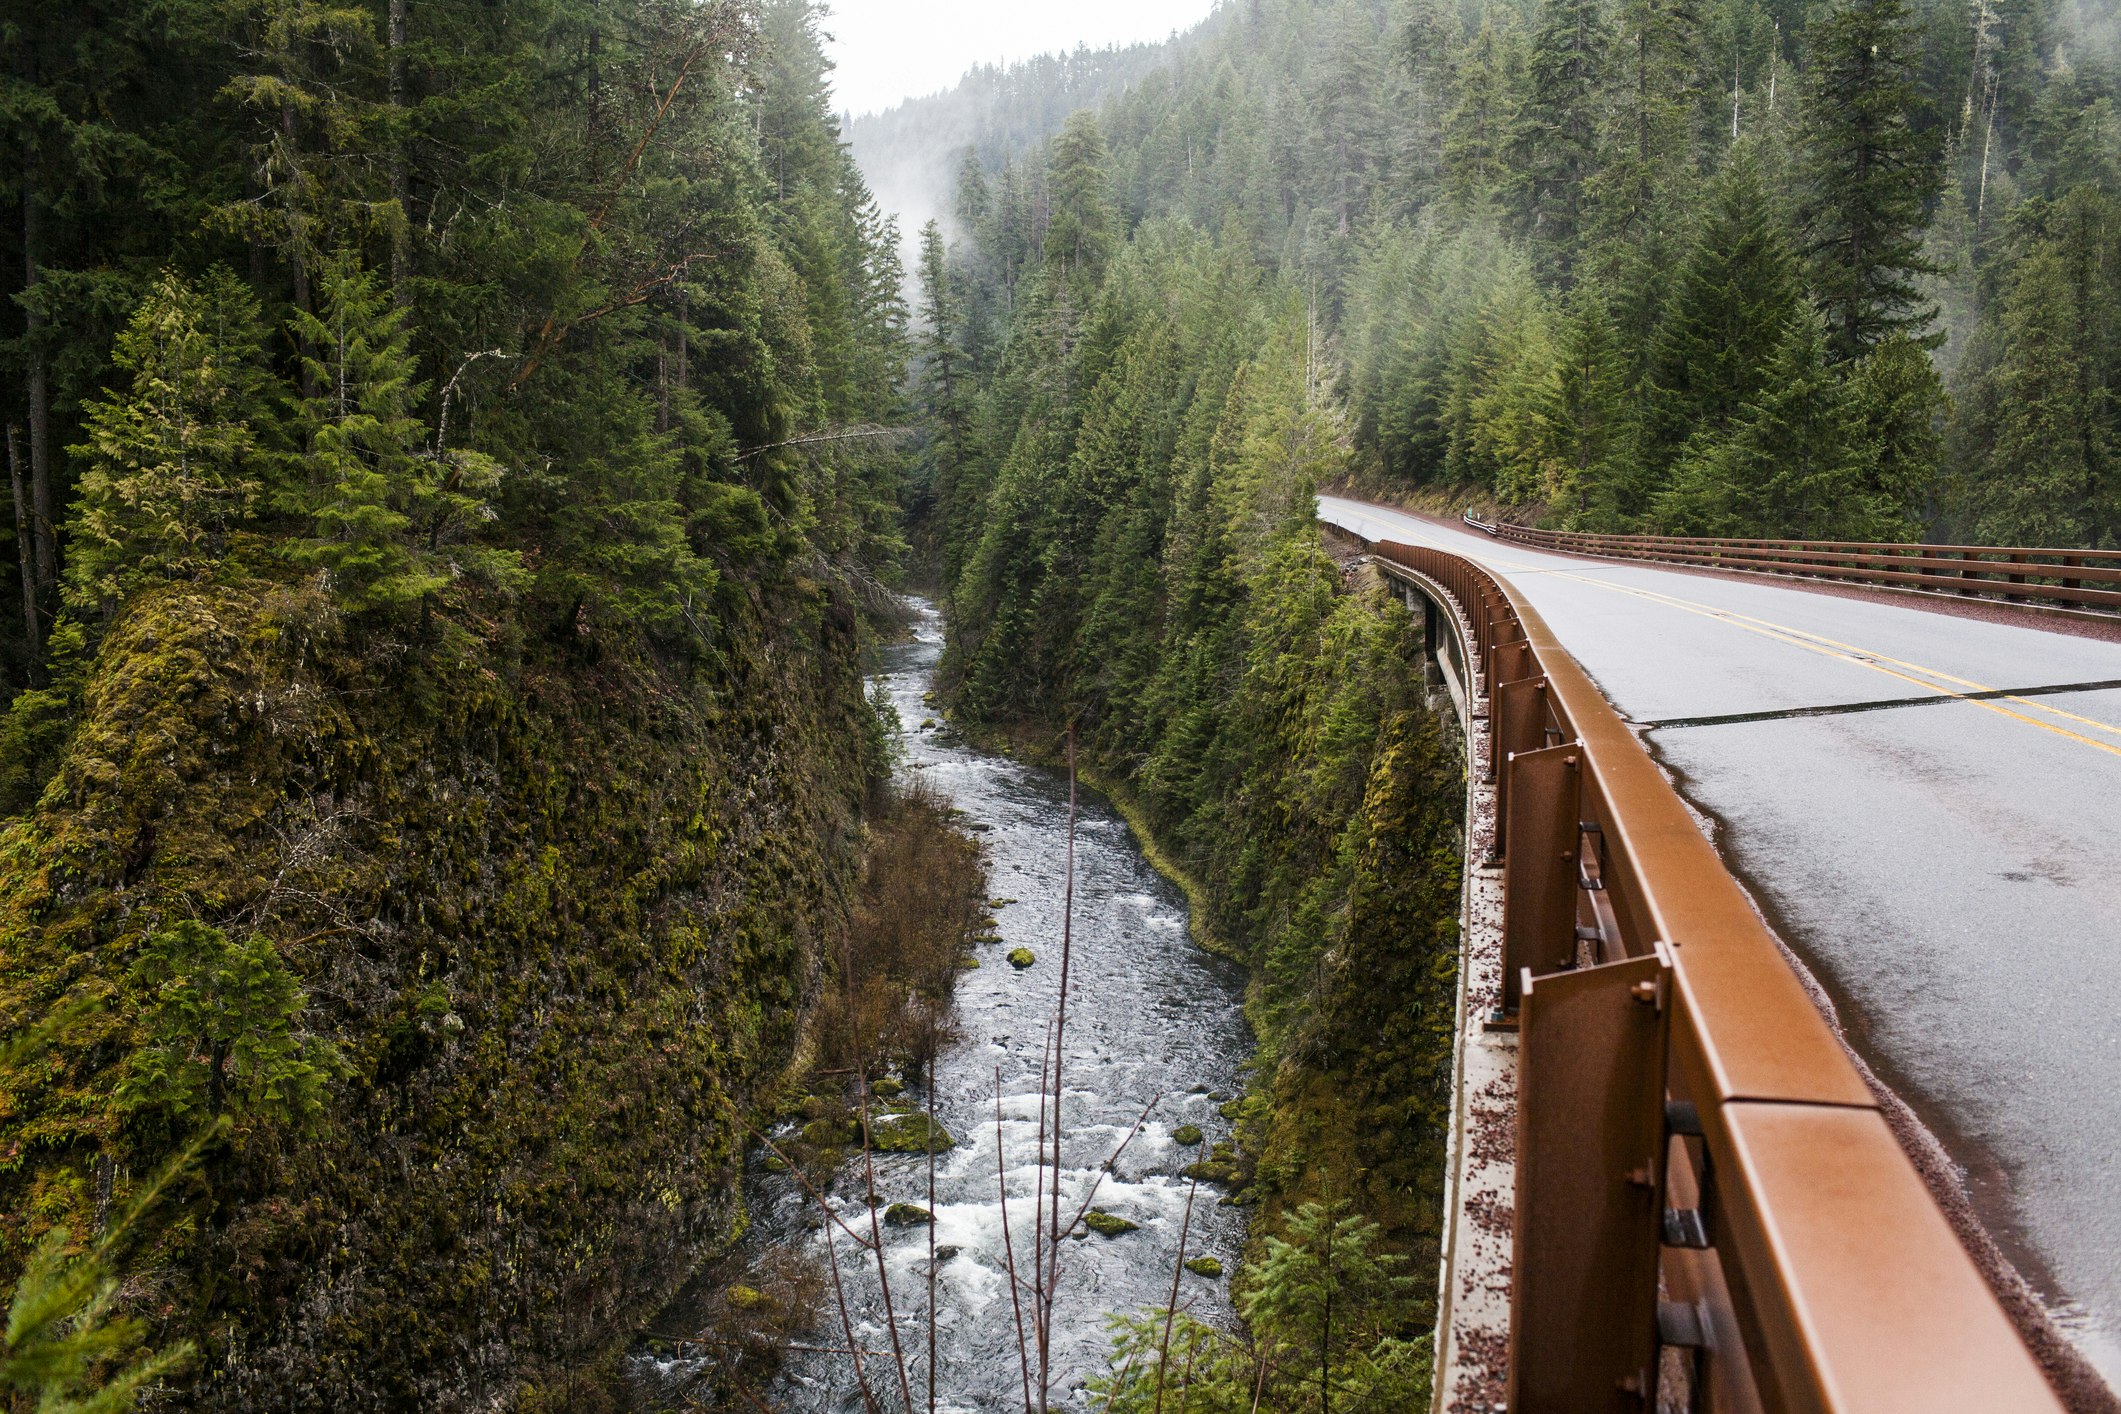 A long stretch of paved two-lane road slick with fresh rain and edged with coppery metal guardrails overlooks the Umpqua River far below, which is edged thick and close with tall evergreen trees. The river itself is a deep navy blue with white caps near the rocks. A thick mist fills the narrow corridor created by the river and the road.